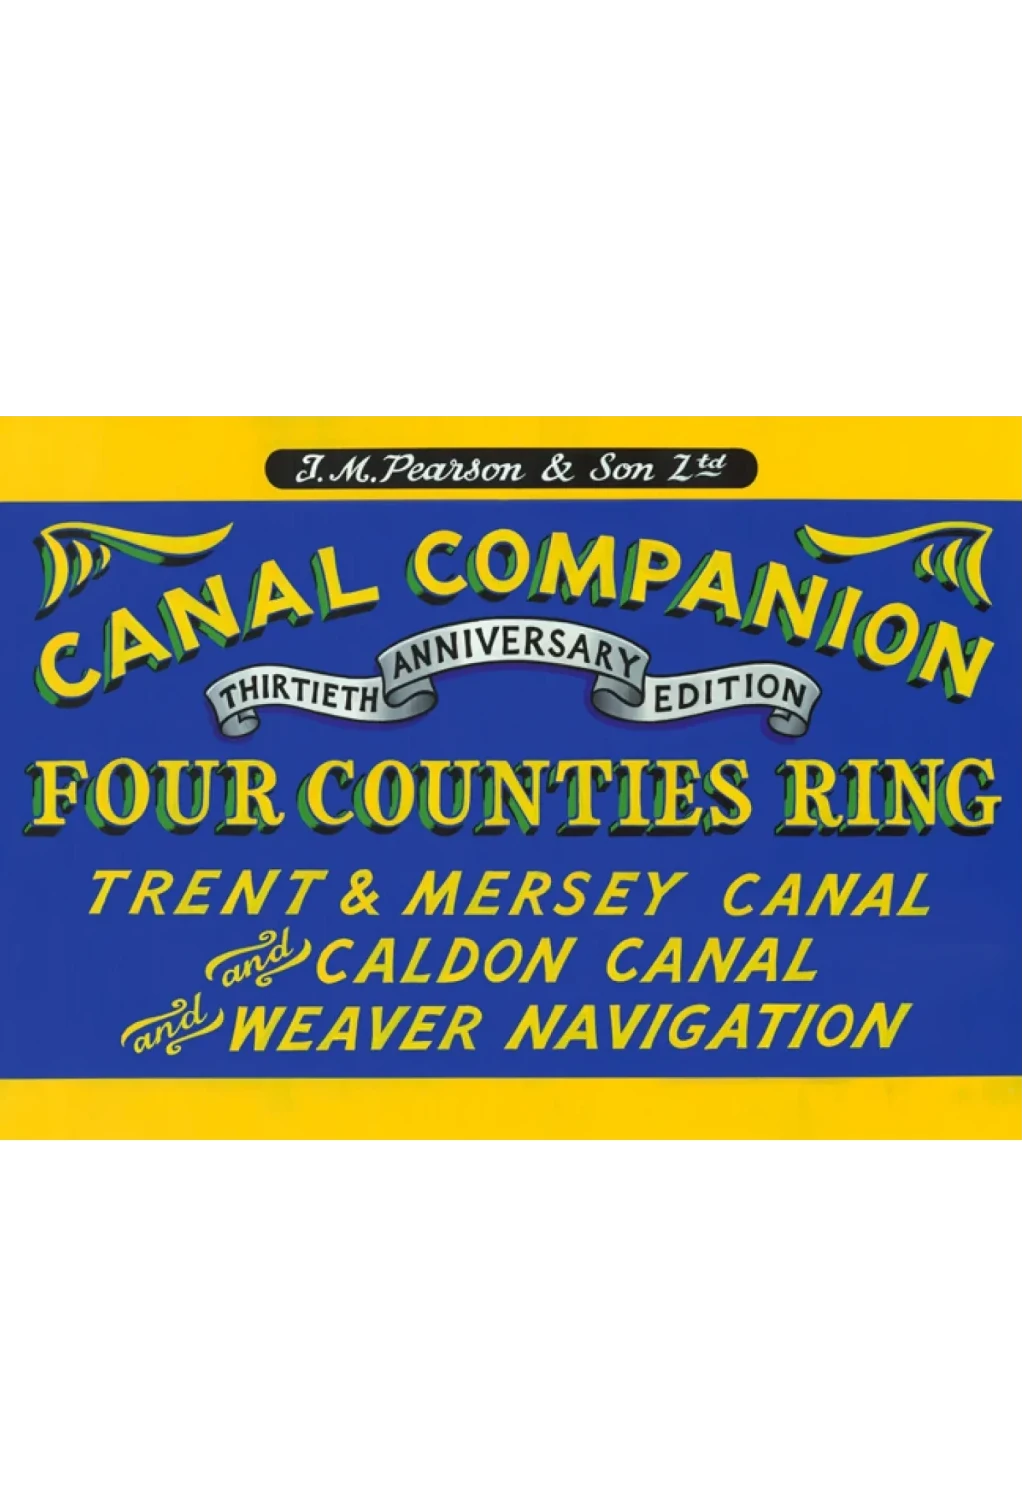 Pearson Canal Companion – Four Counties Ring